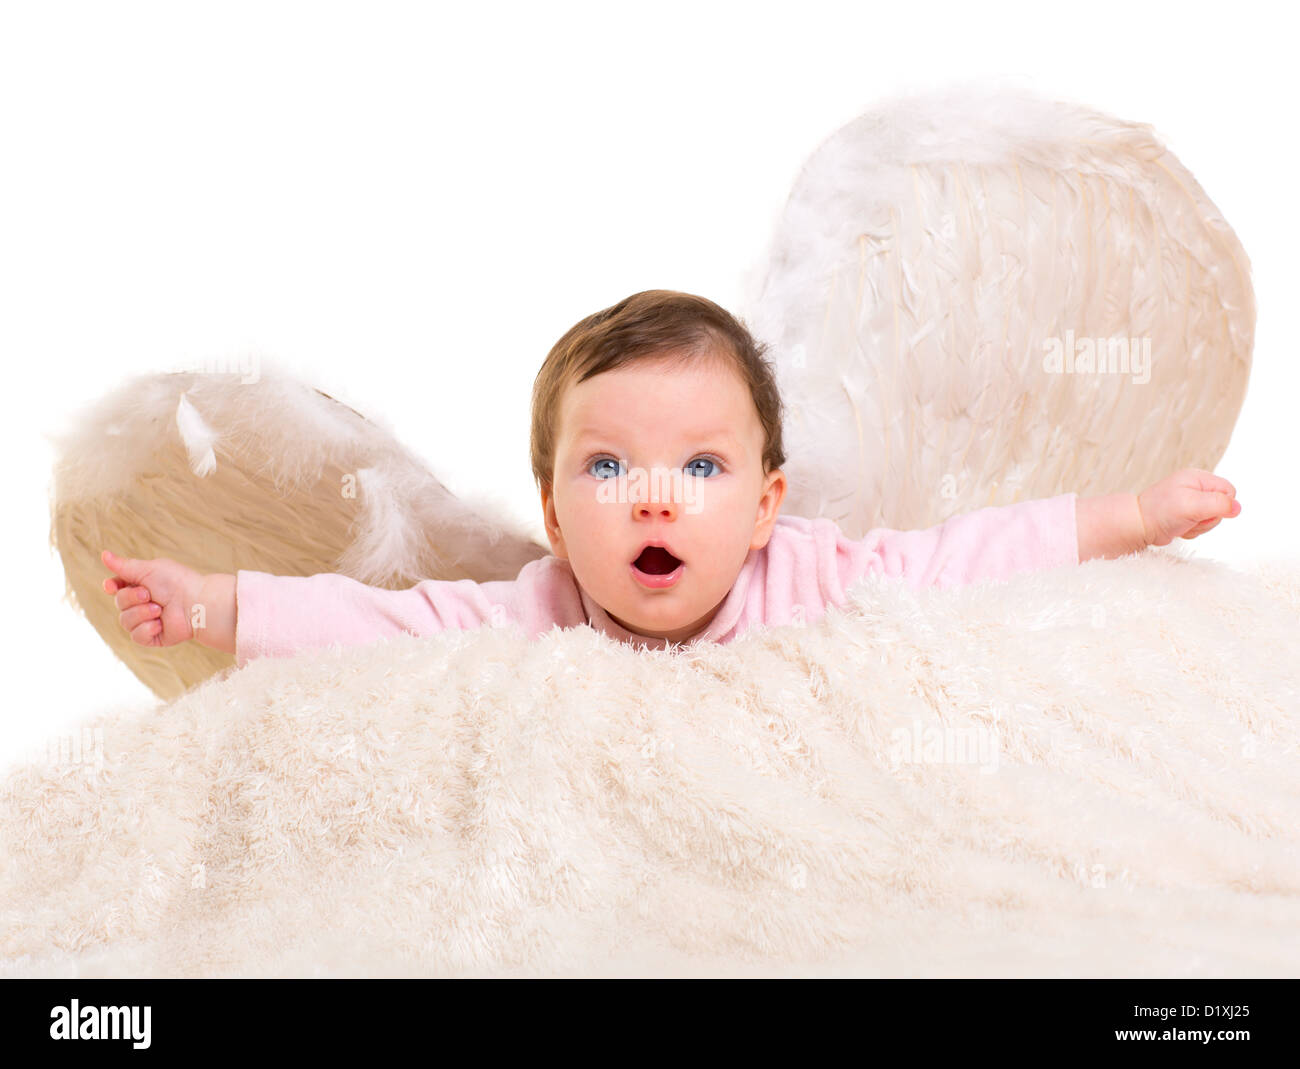 baby girl angel with feather white wings on white fur and open arms Stock Photo